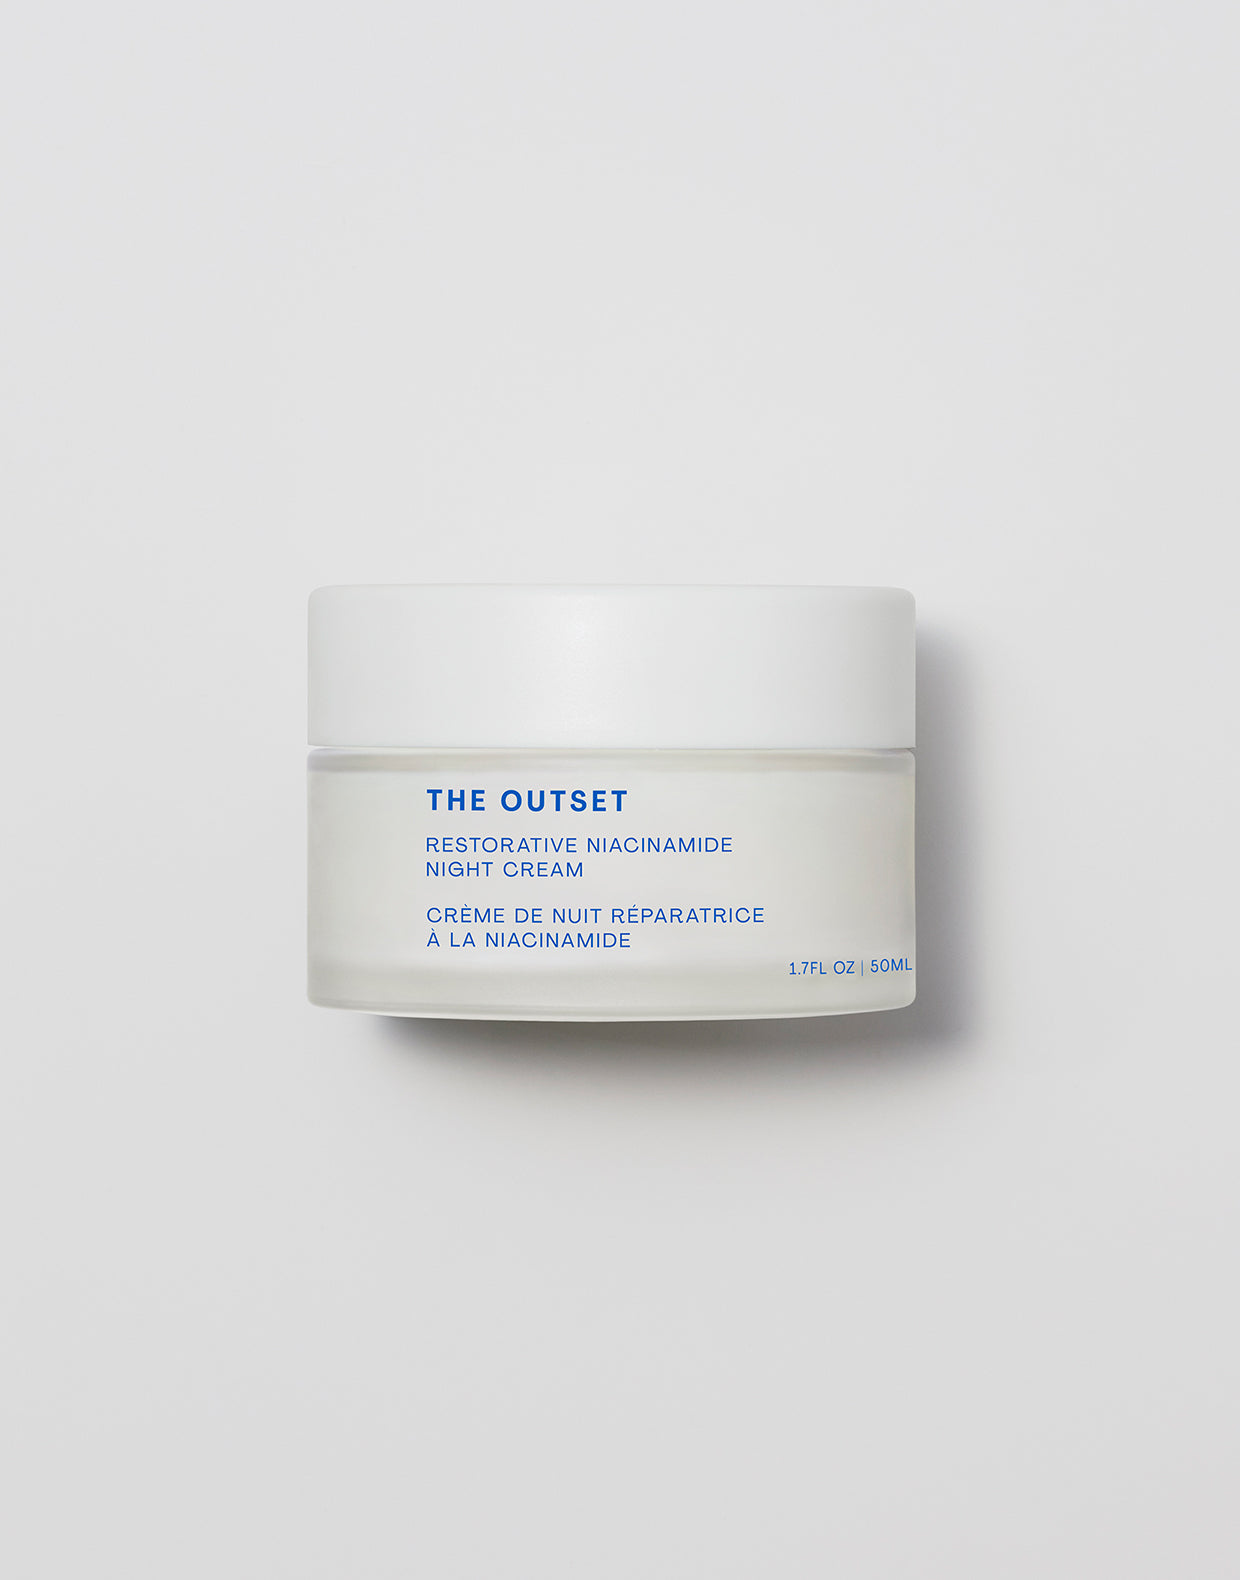 Front view photo of The Outset's Restorative Niacinamide Night Cream with lid